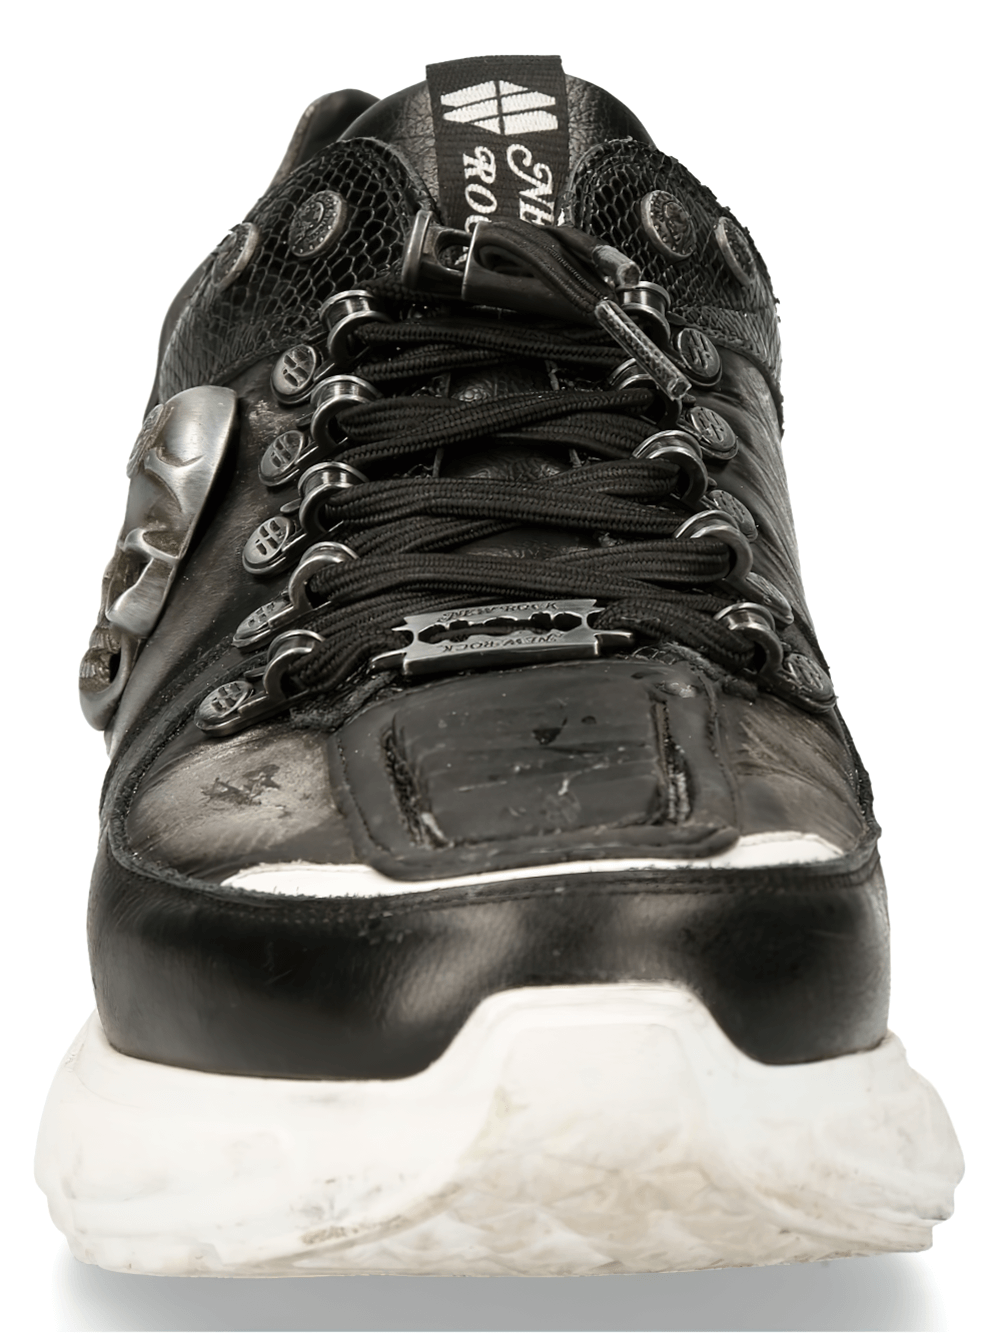 NEW ROCK Bold Rock-Inspired Leather Sneakers with Skull